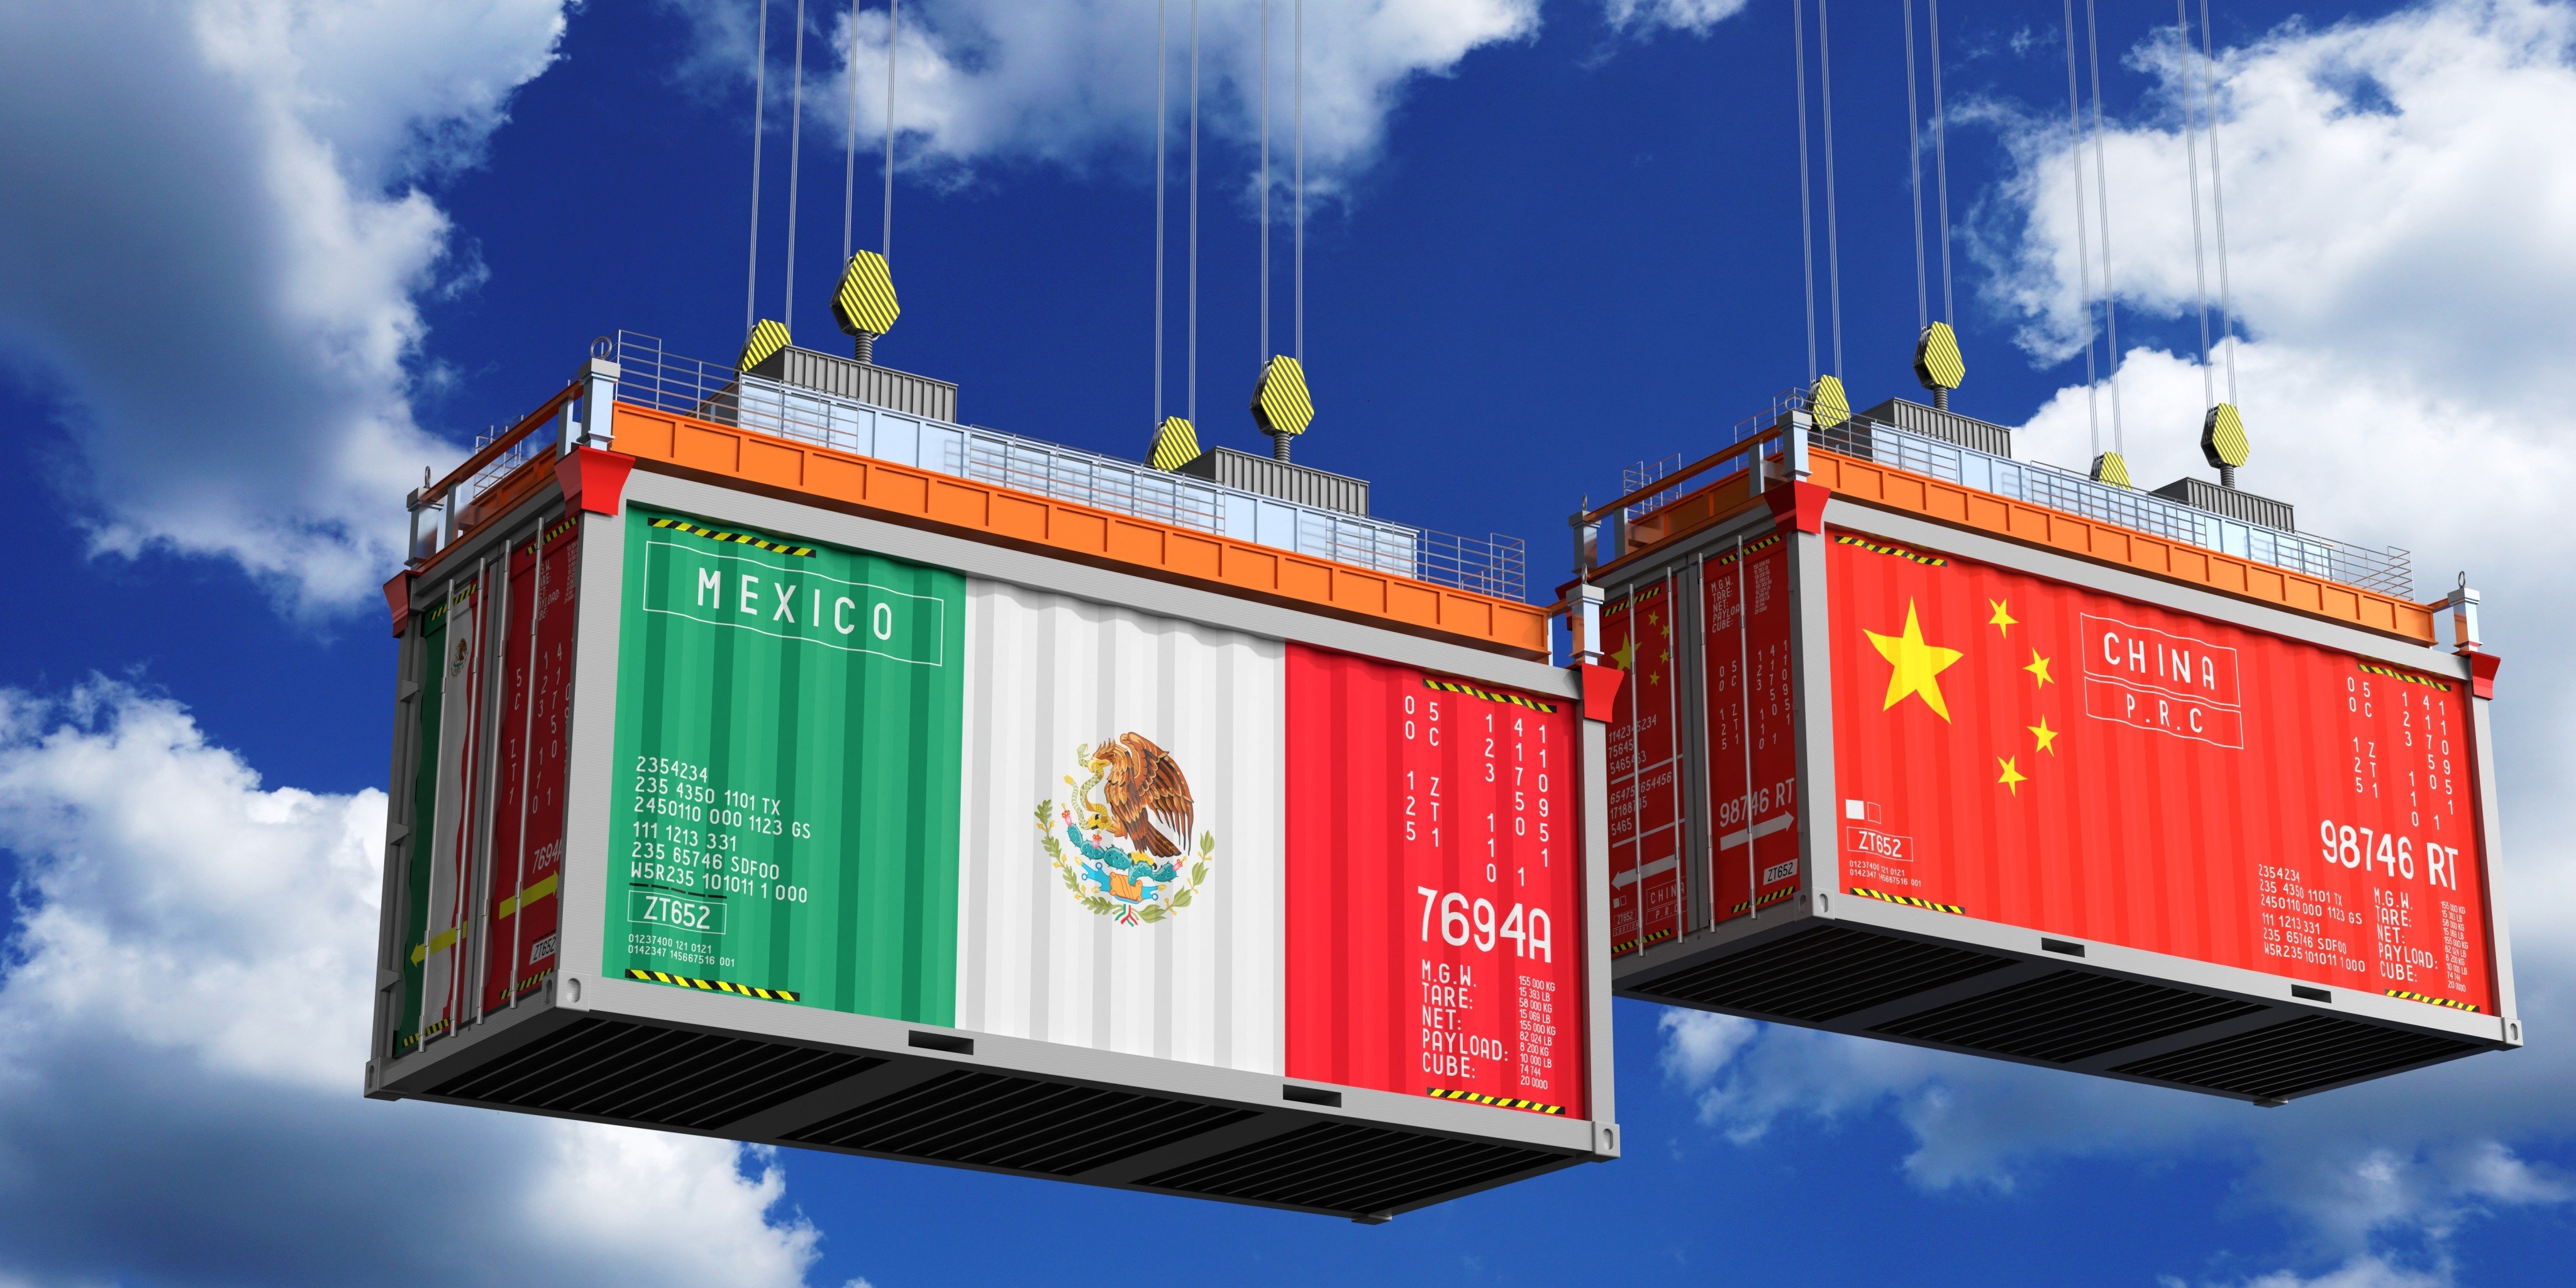 Mexico overtook China as America’s No 1 importer in February. Illustration: Shutterstock